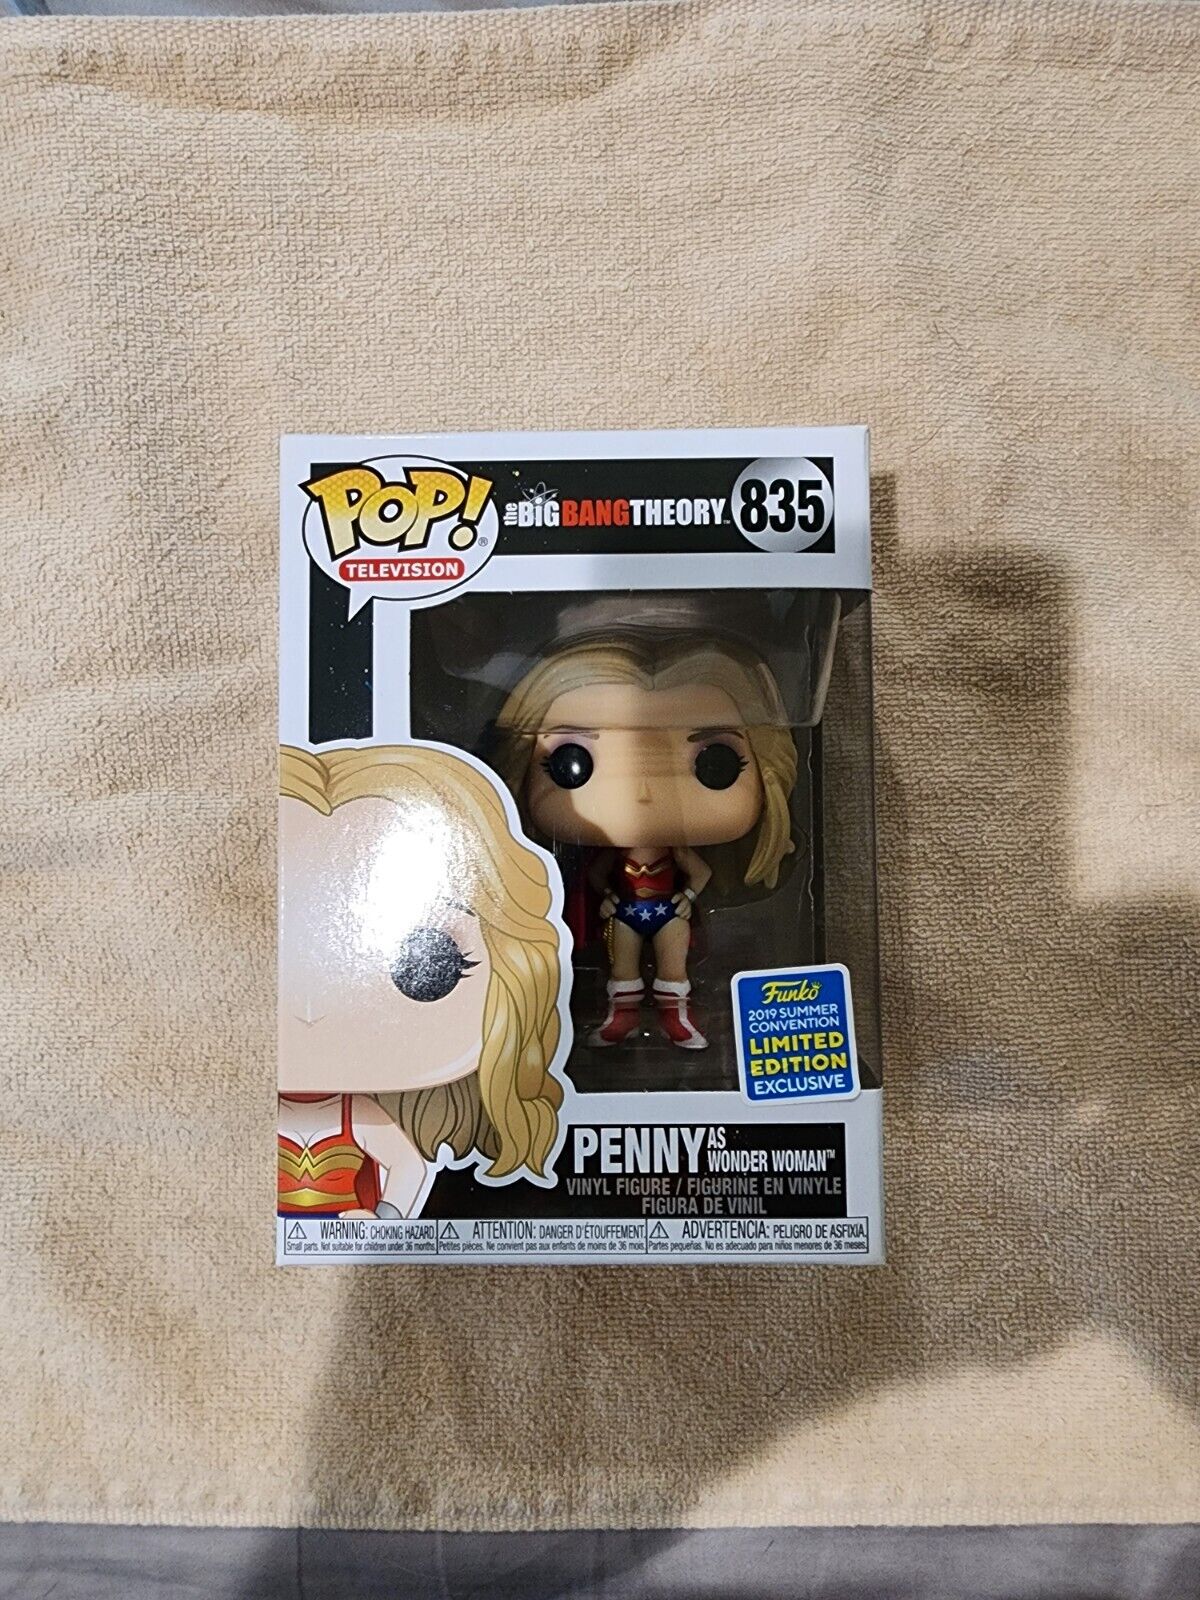 FUNKO POP THE BIG BANG THEORY 835 SDCC 2019 PENNY AS WONDER WOMAN EXCLUSIVE